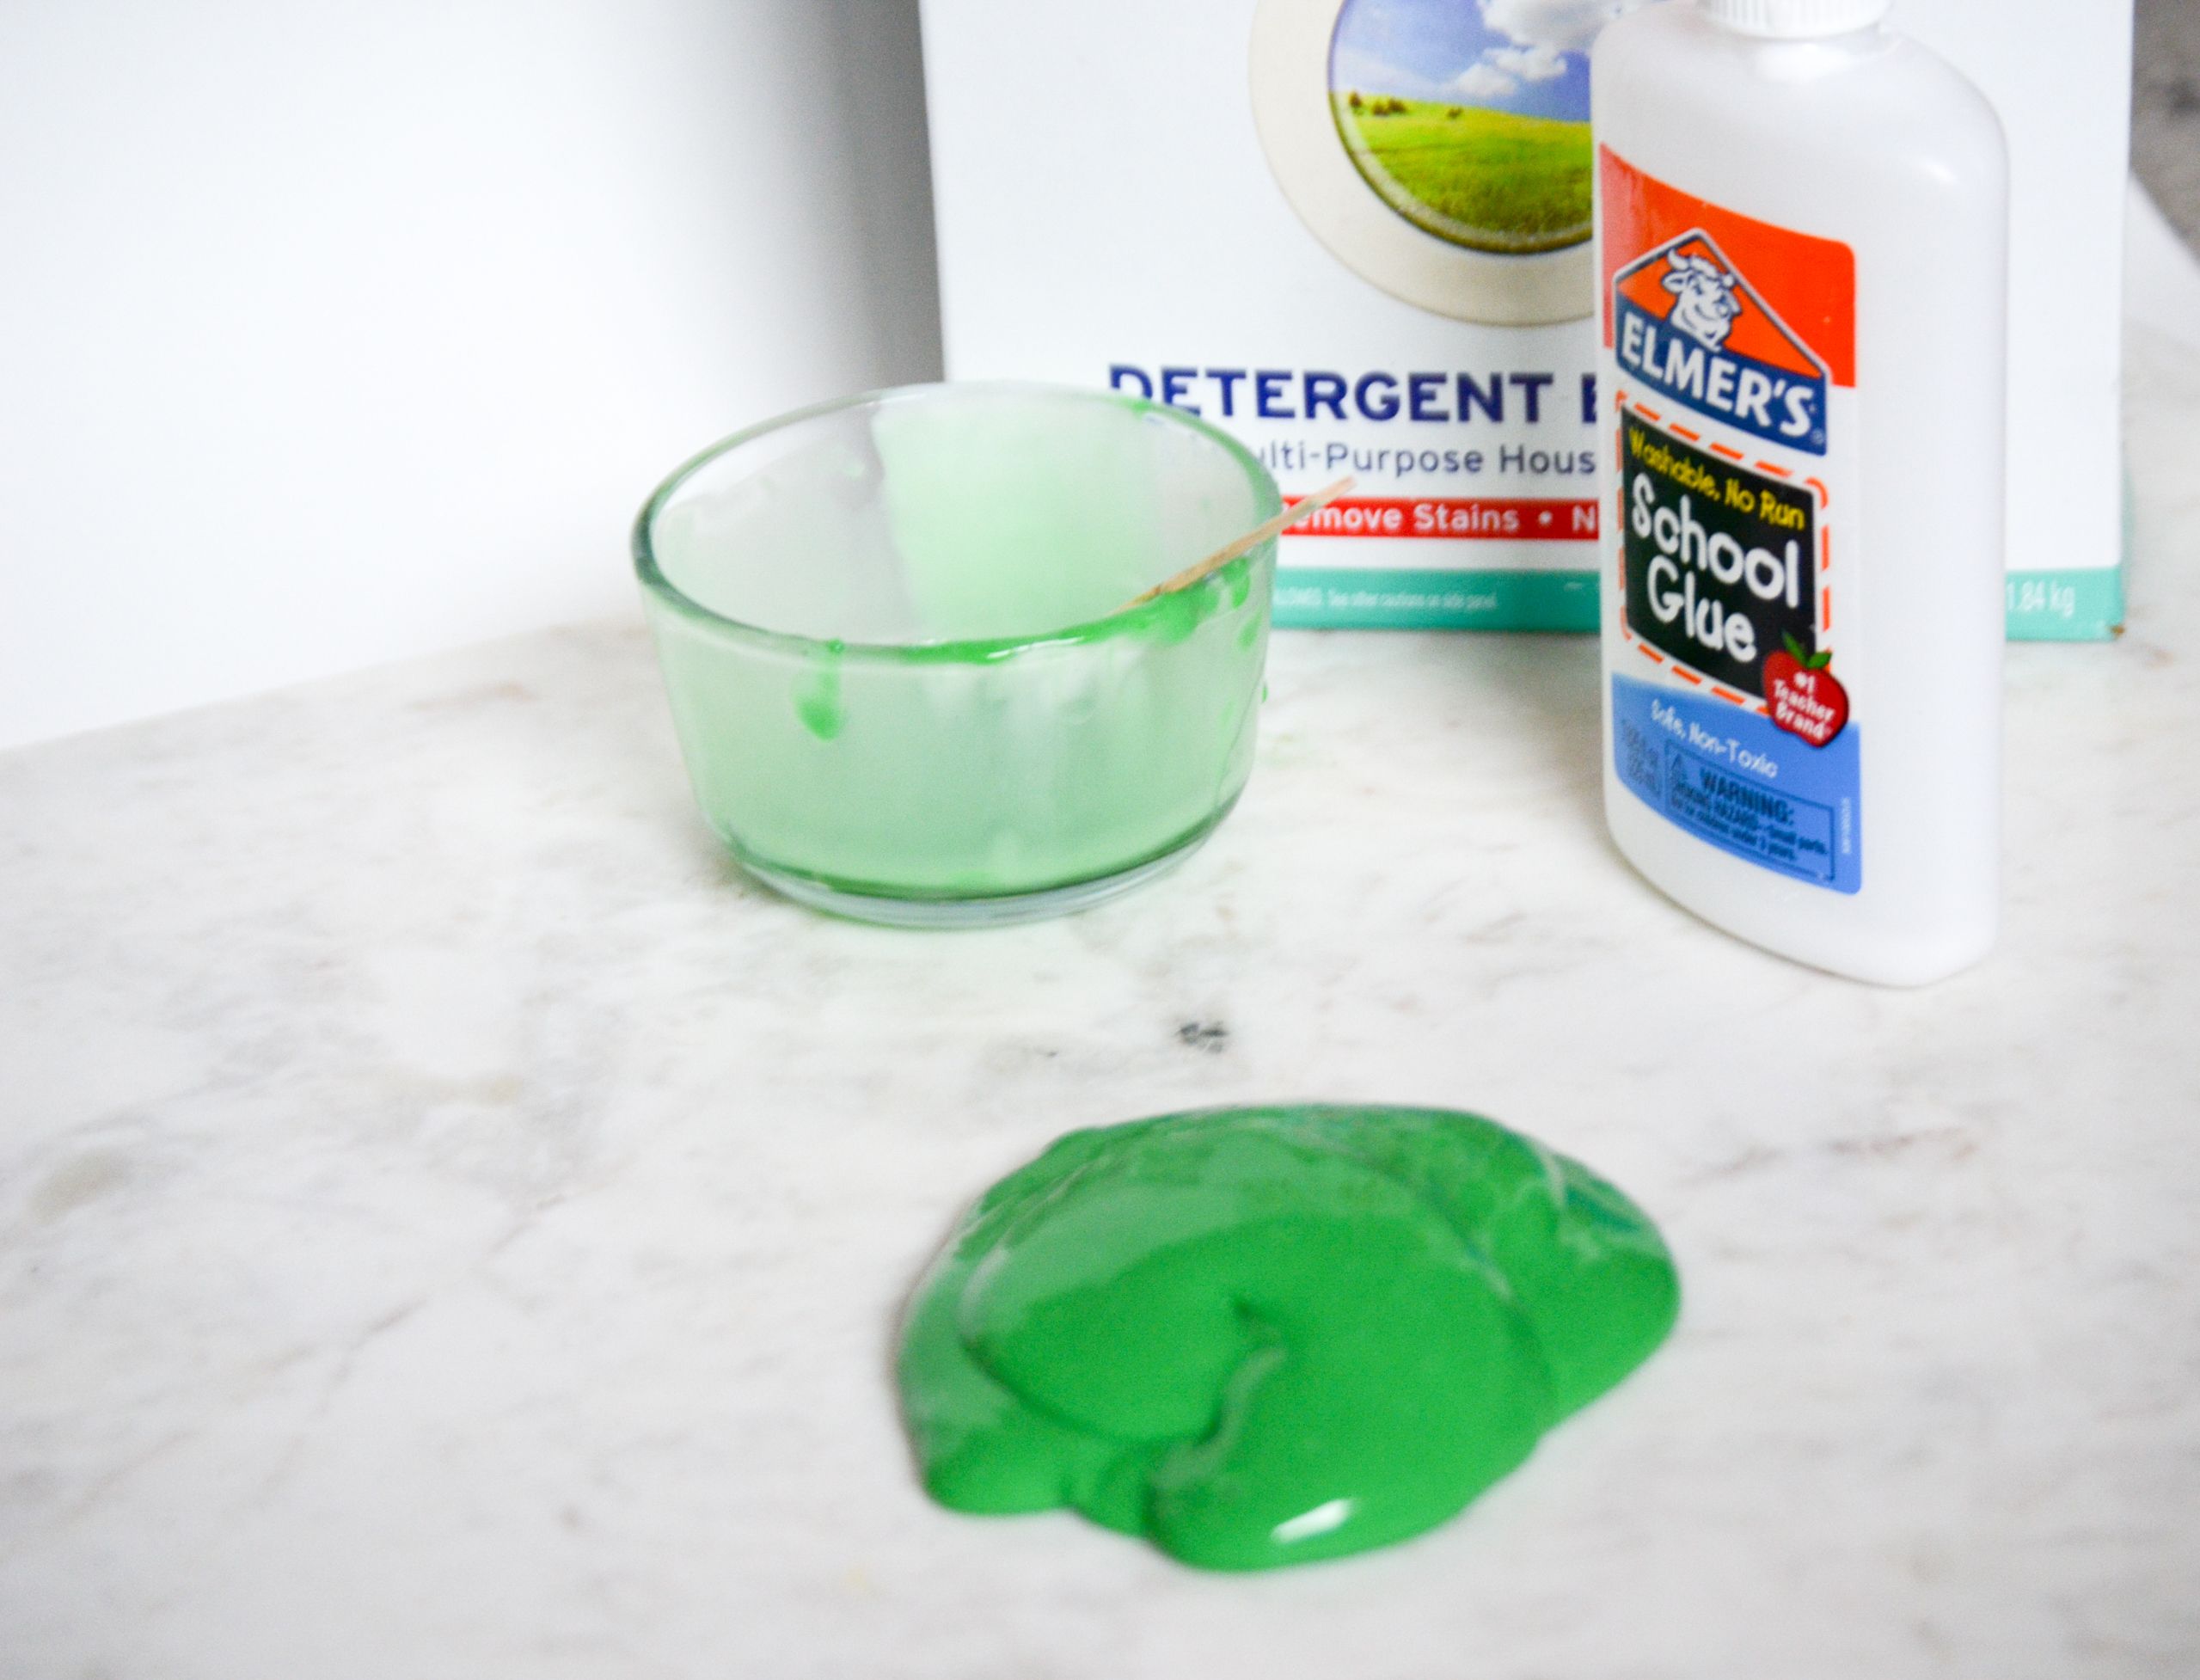 Super EASY Slime Recipe With Just 2 Ingredients! - STEM Education